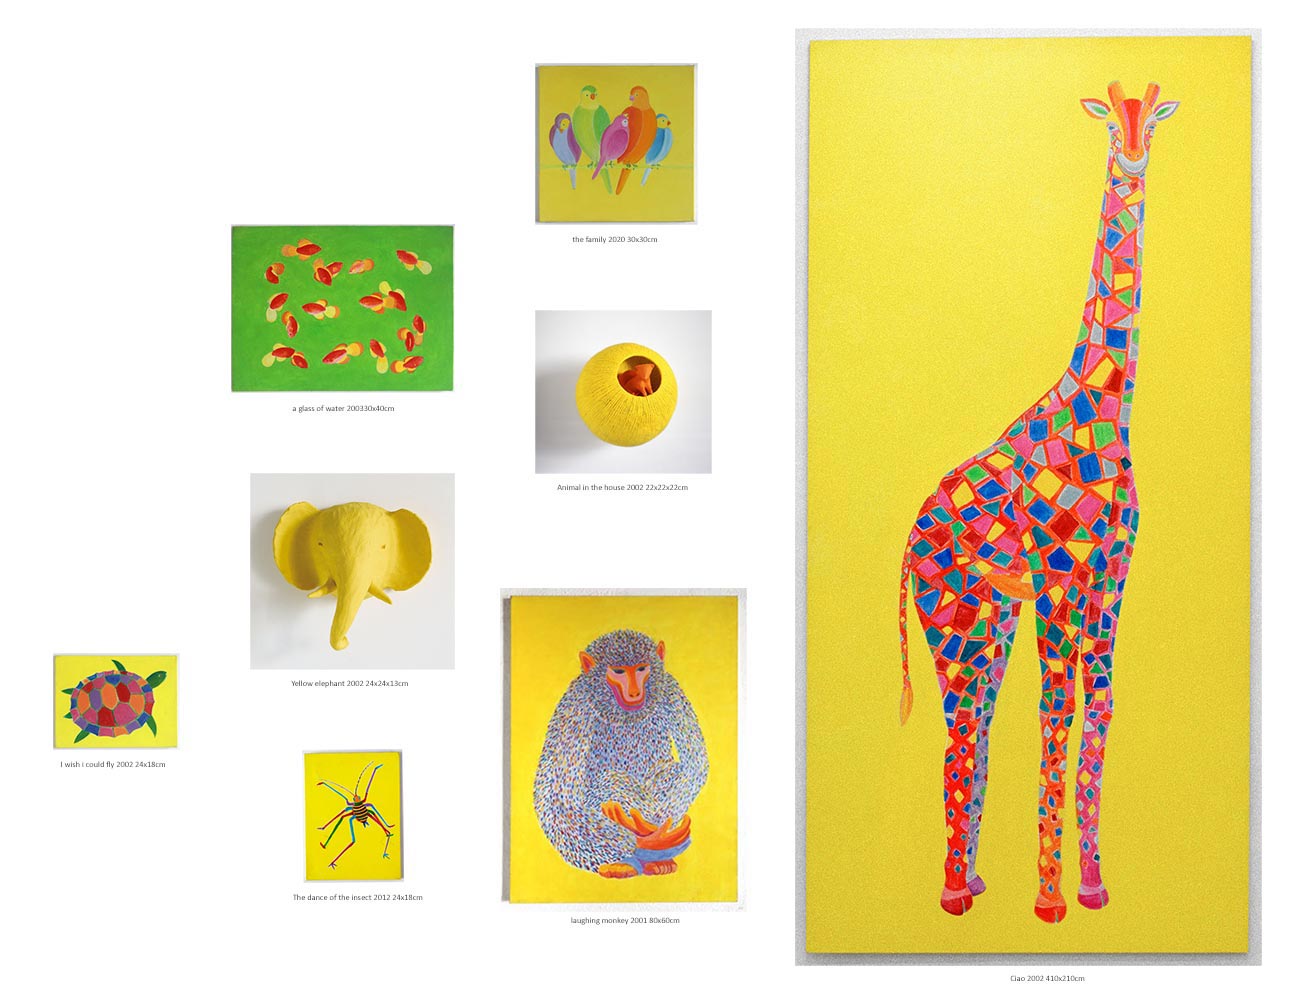 Works by Kazumasa Mizokami, A photo consisting of 6 animal paintings and 2 sculptures, from the right Giraffe Parakeet Goldfish Squirrel Monkey Elephant tortoise. Yellow decorated colors are the main focus